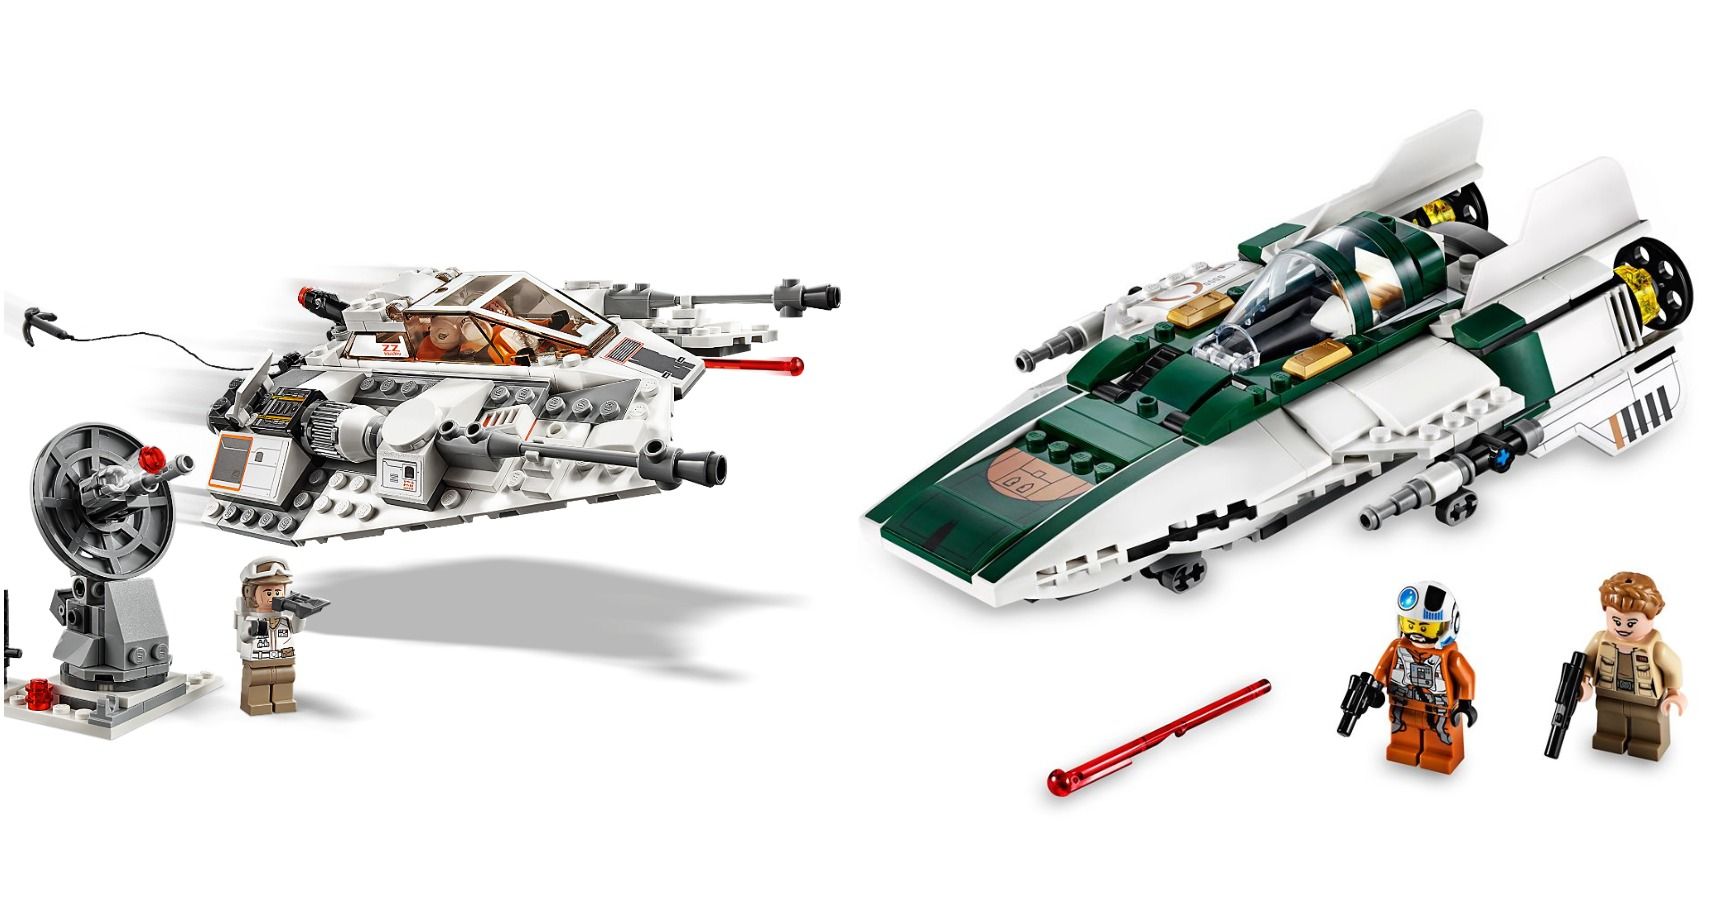 Build An Empire With These Star Wars LEGO Sets